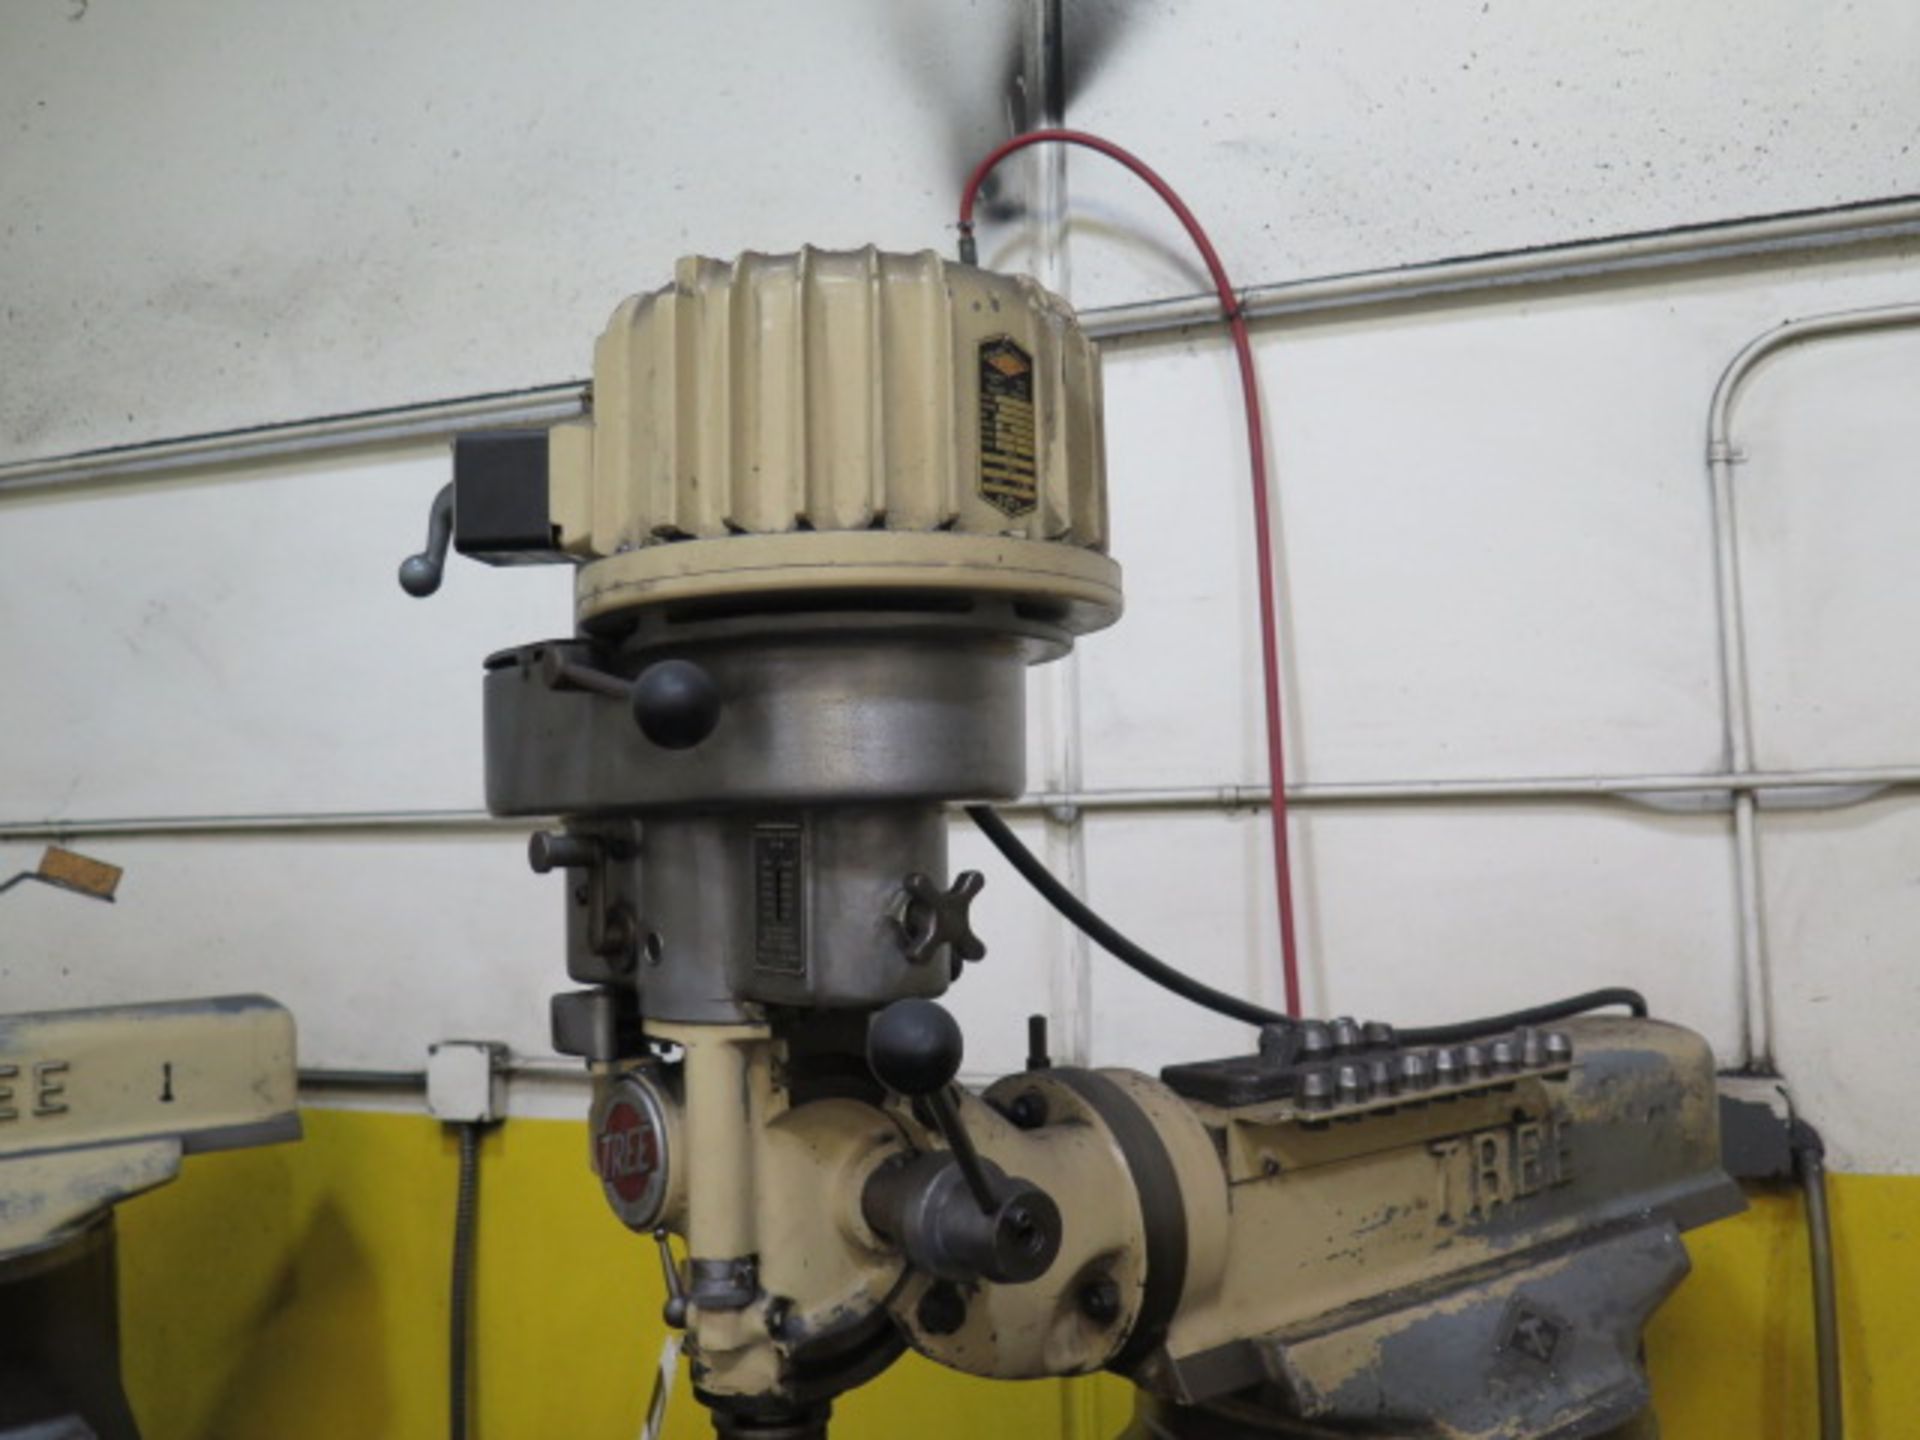 Tree 2UVR Vertical Mill s/n 7989 w/ 60-3300 RPM, Colleted Spindle, PF, 10 ½” x 42” Table, SOLD AS IS - Image 3 of 9